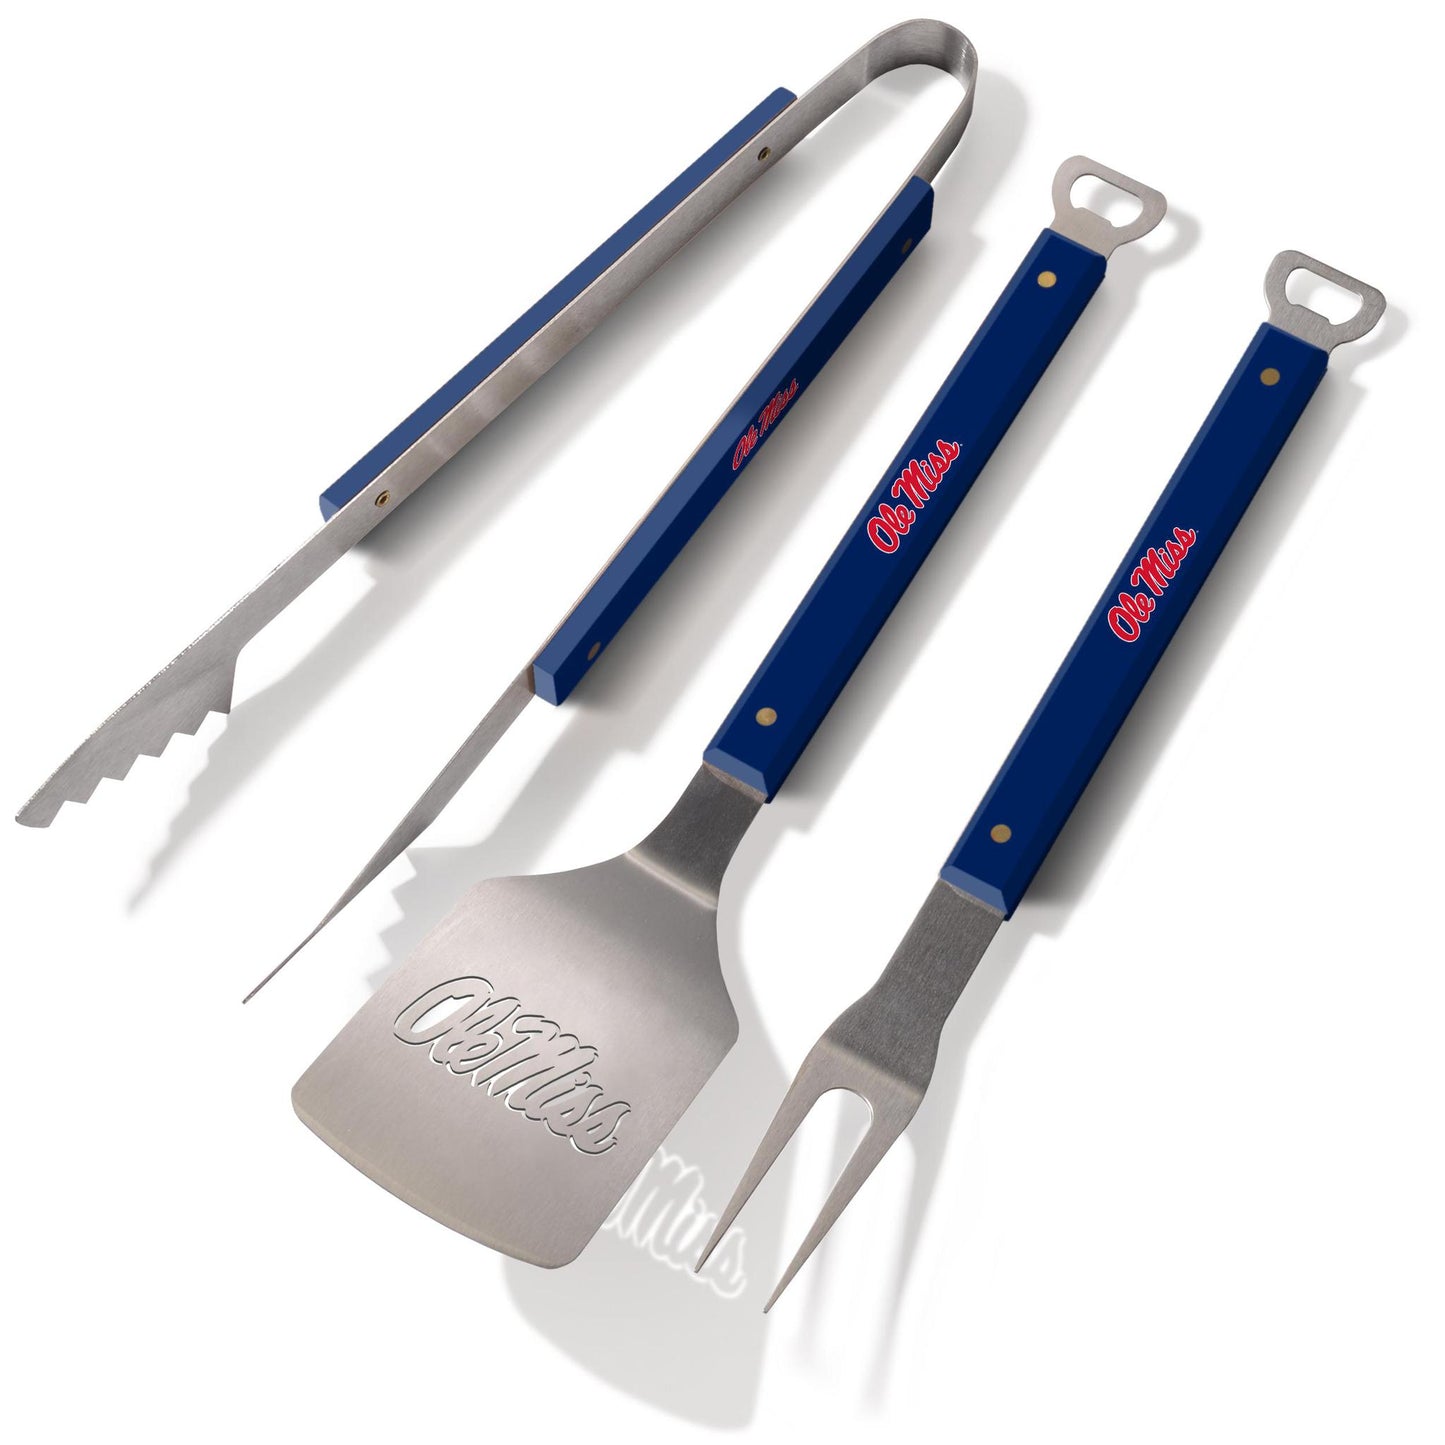 Toronto Blue Jays Tailgate Gear, Blue Jays Party Supplies